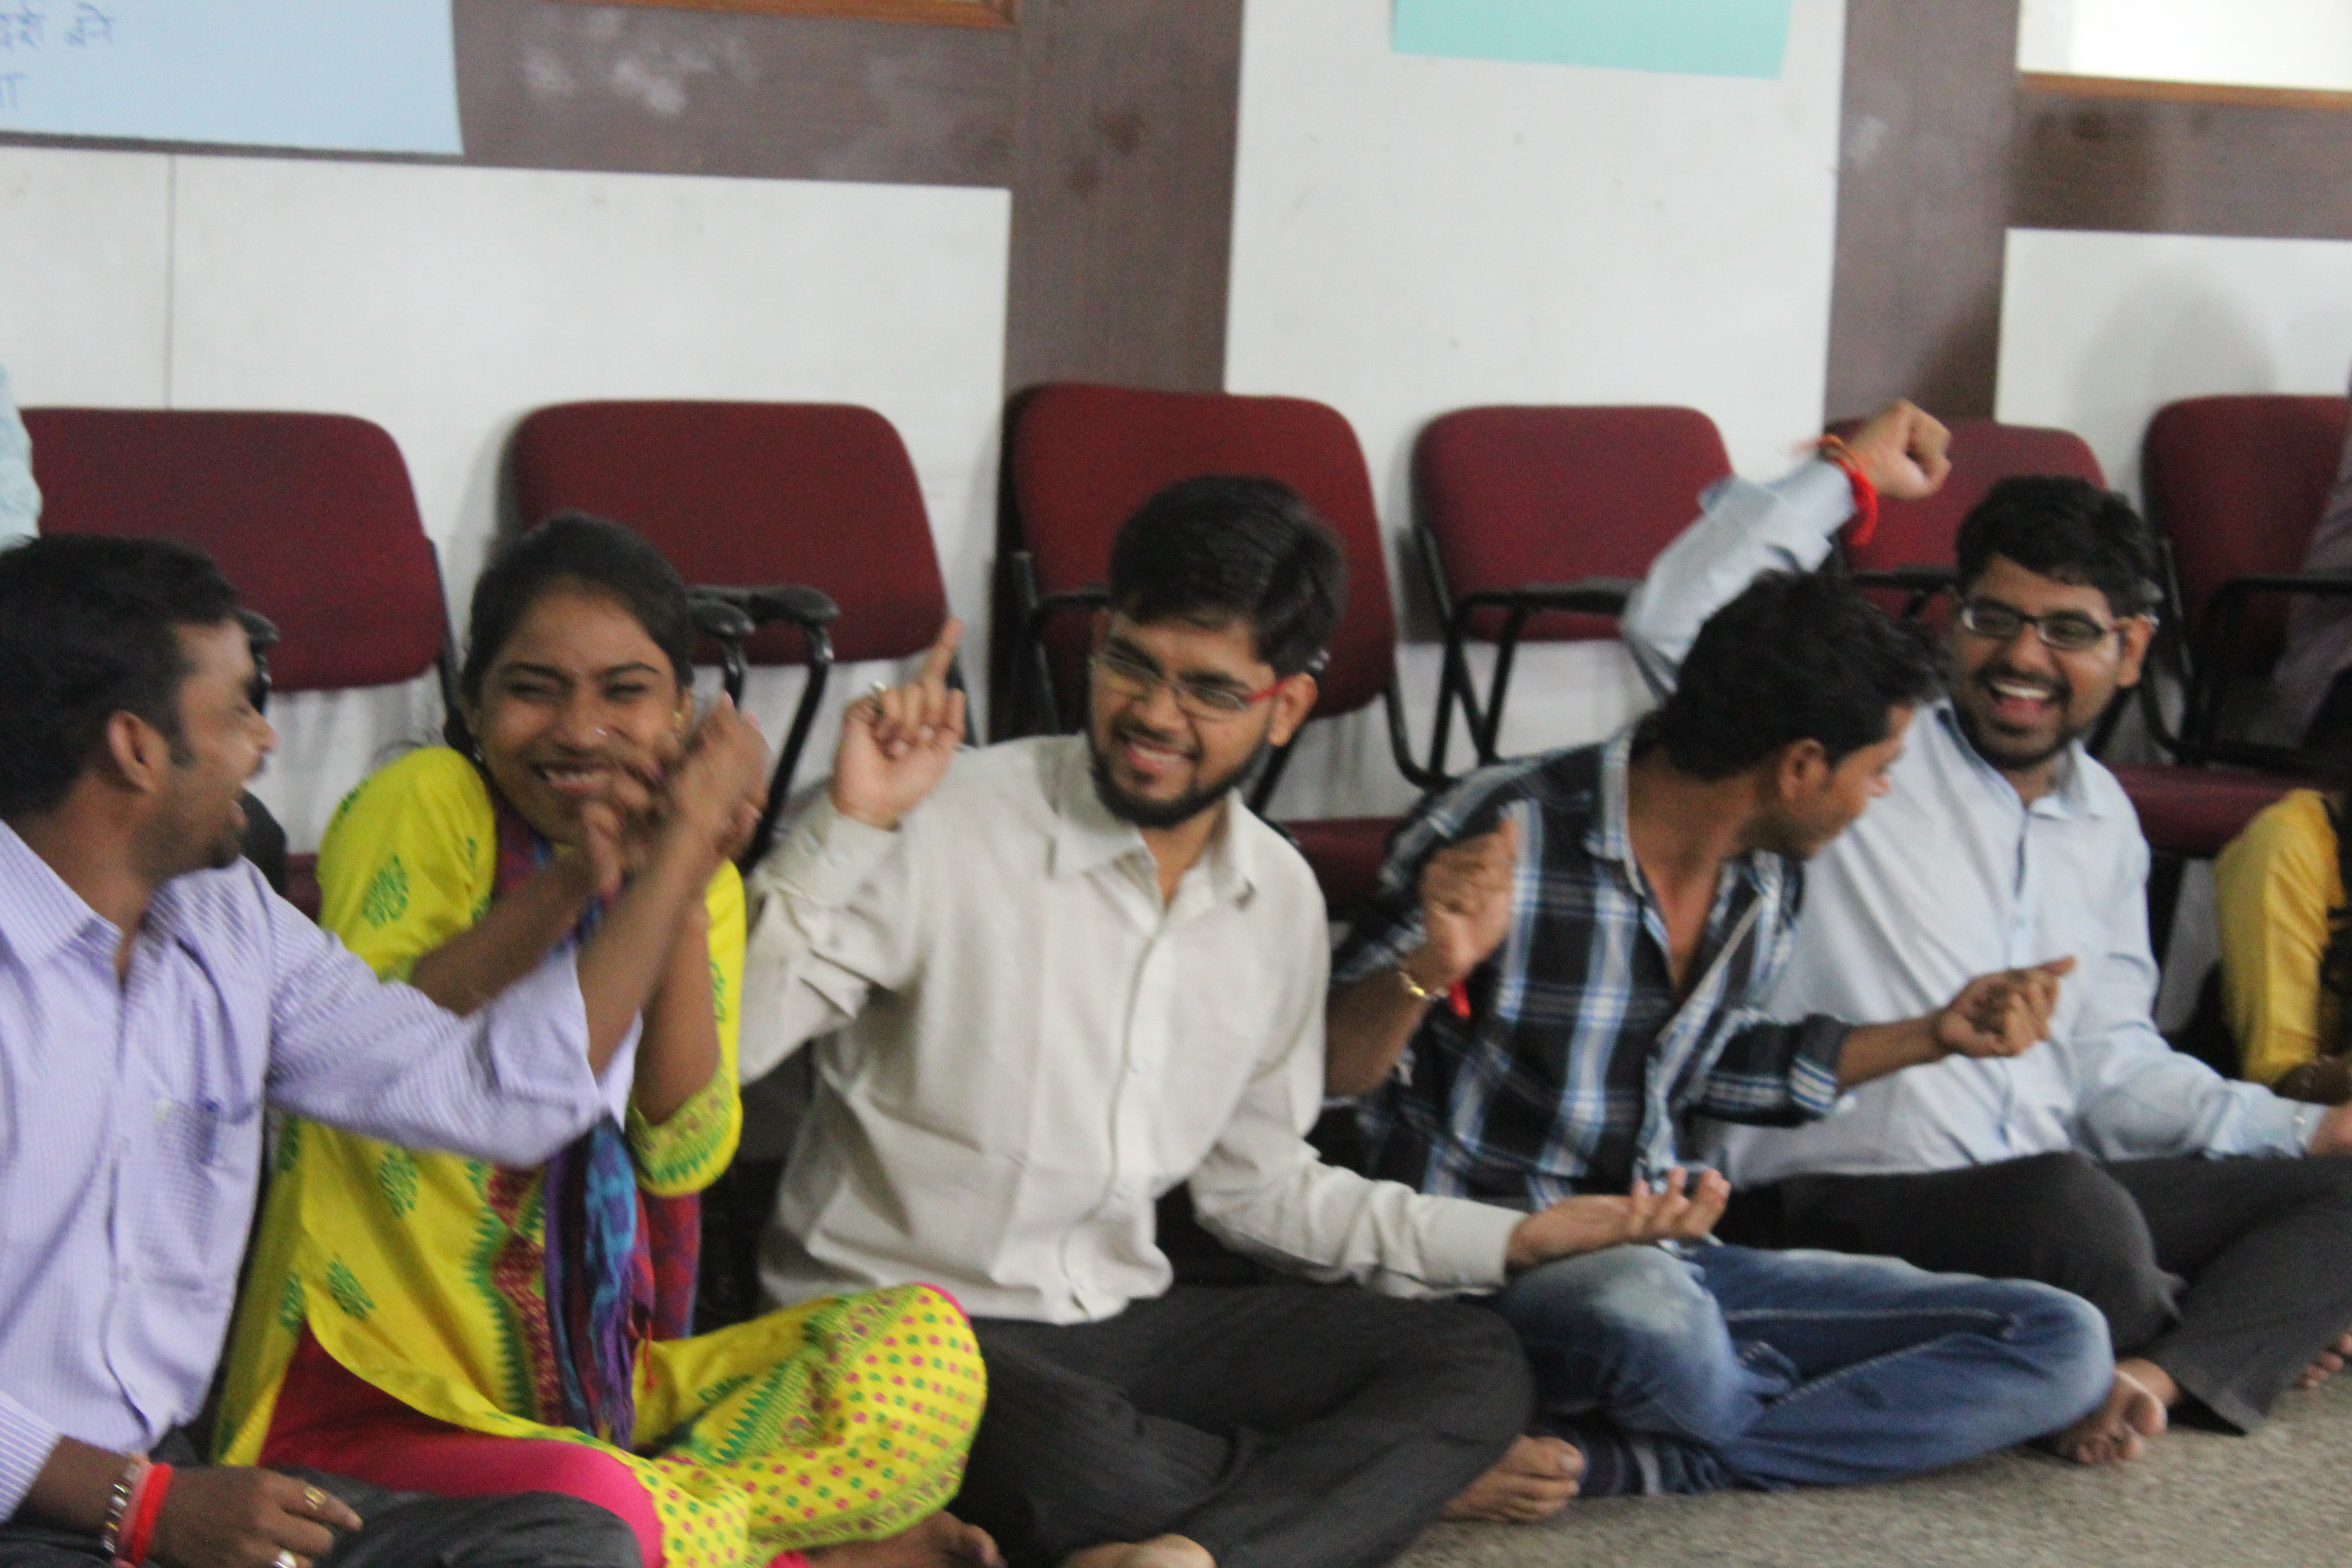 Workshop on Advocacy of Child Rights Through Puppetry and Co-operative Games (Days 2 and 3)